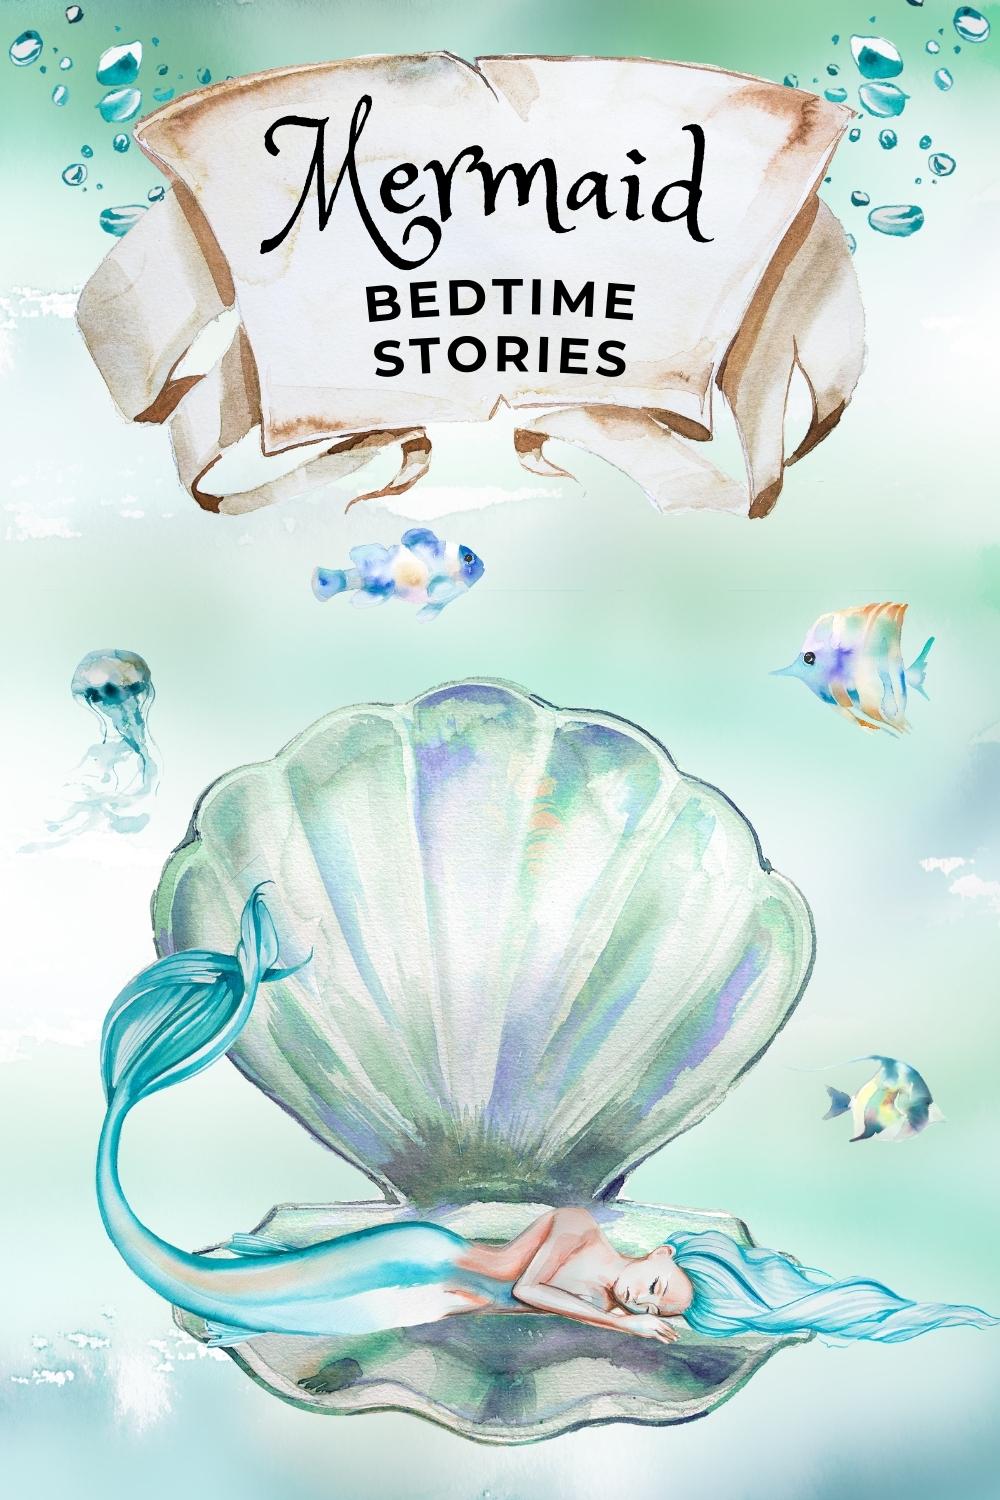 Four mermaid bedtime stories to help you doze off into dreamland as smoothly as a gentle wave on the sea.